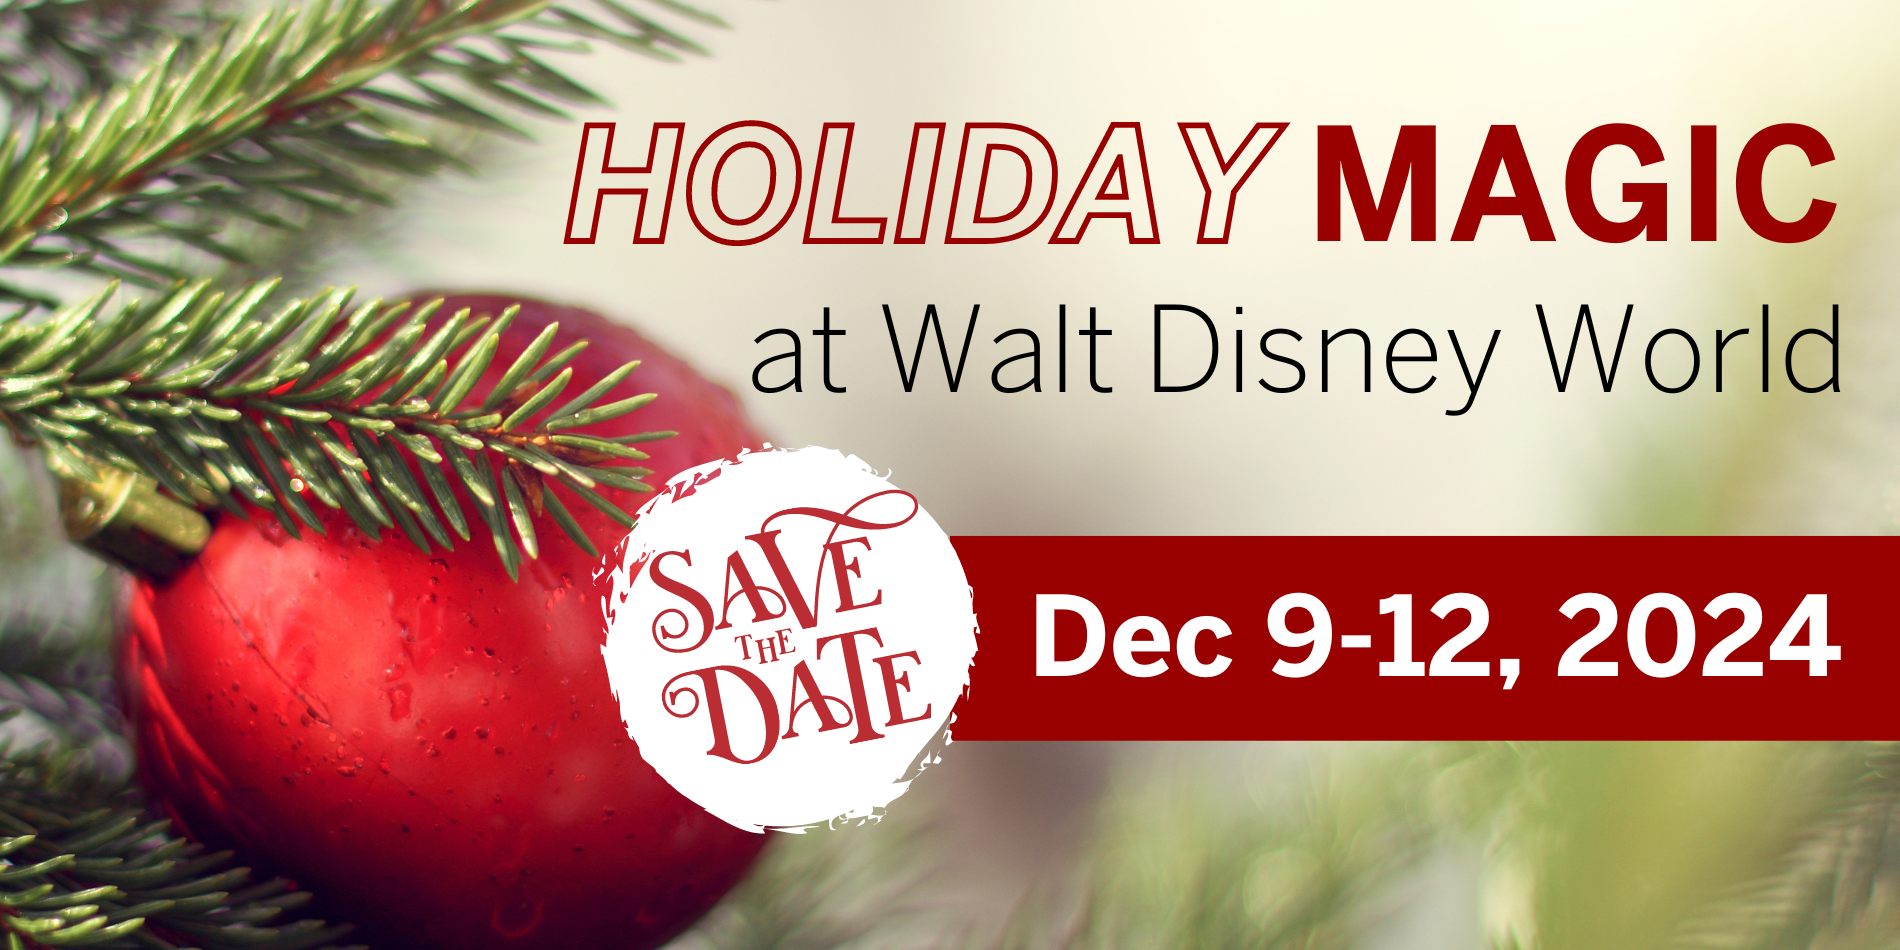 Background image shows a large red ornament on the left side coupled by greenery; the words on the right side read "Holiday Magic at Walt Disney World: Dec 9-12, 2024"